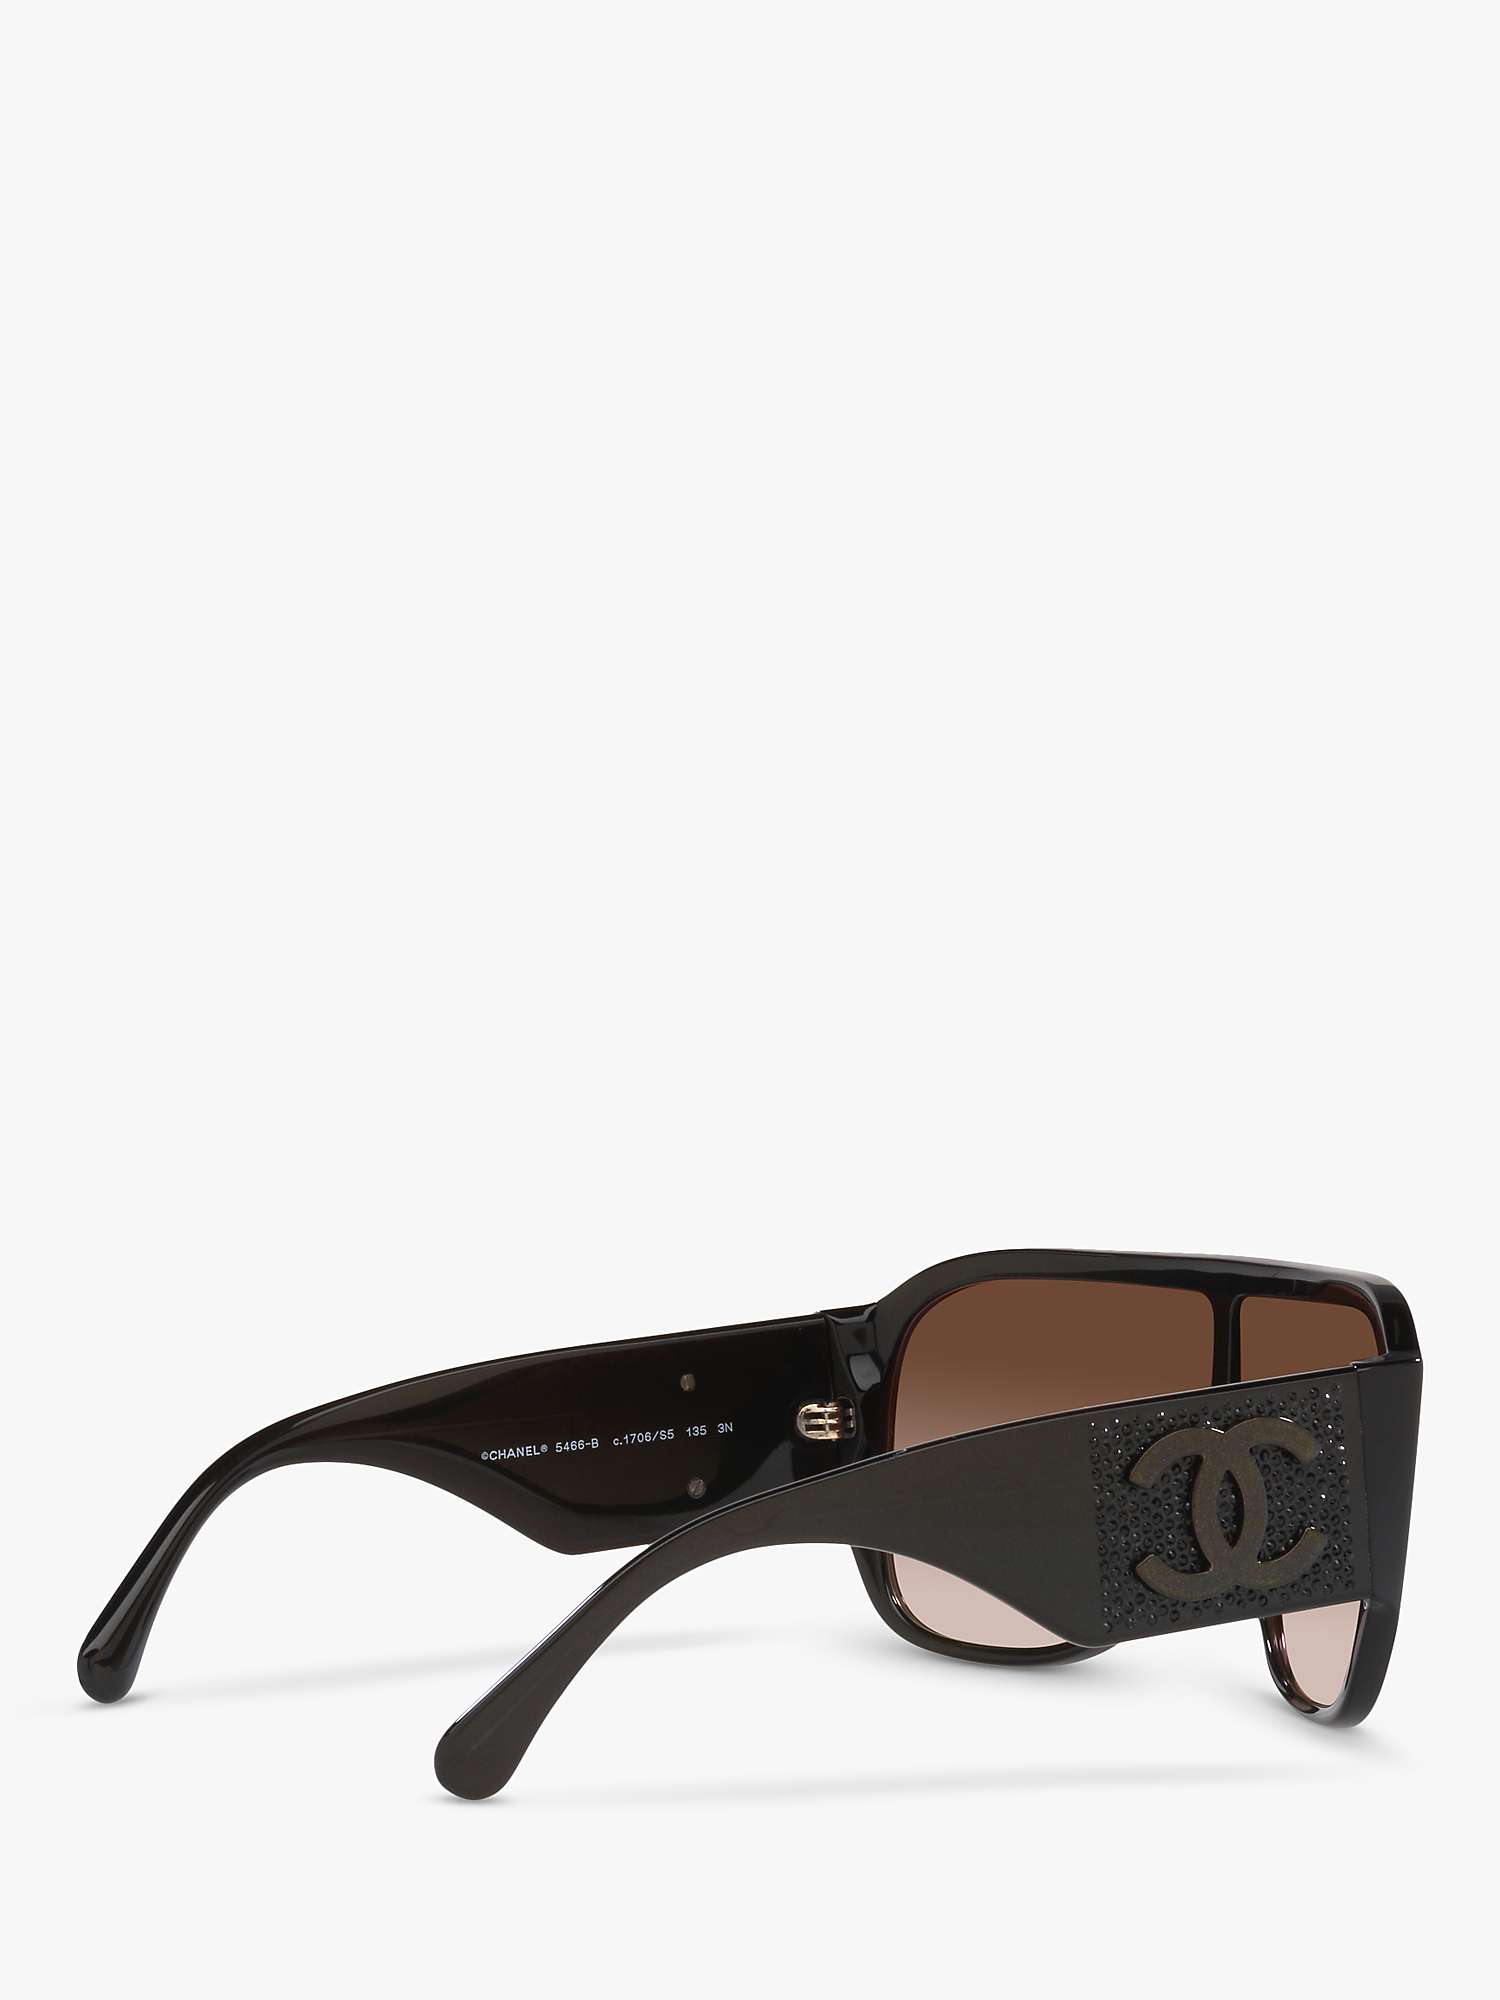 Buy CHANEL Pillow Sunglasses CH5466B Brown/Brown Gradient Online at johnlewis.com